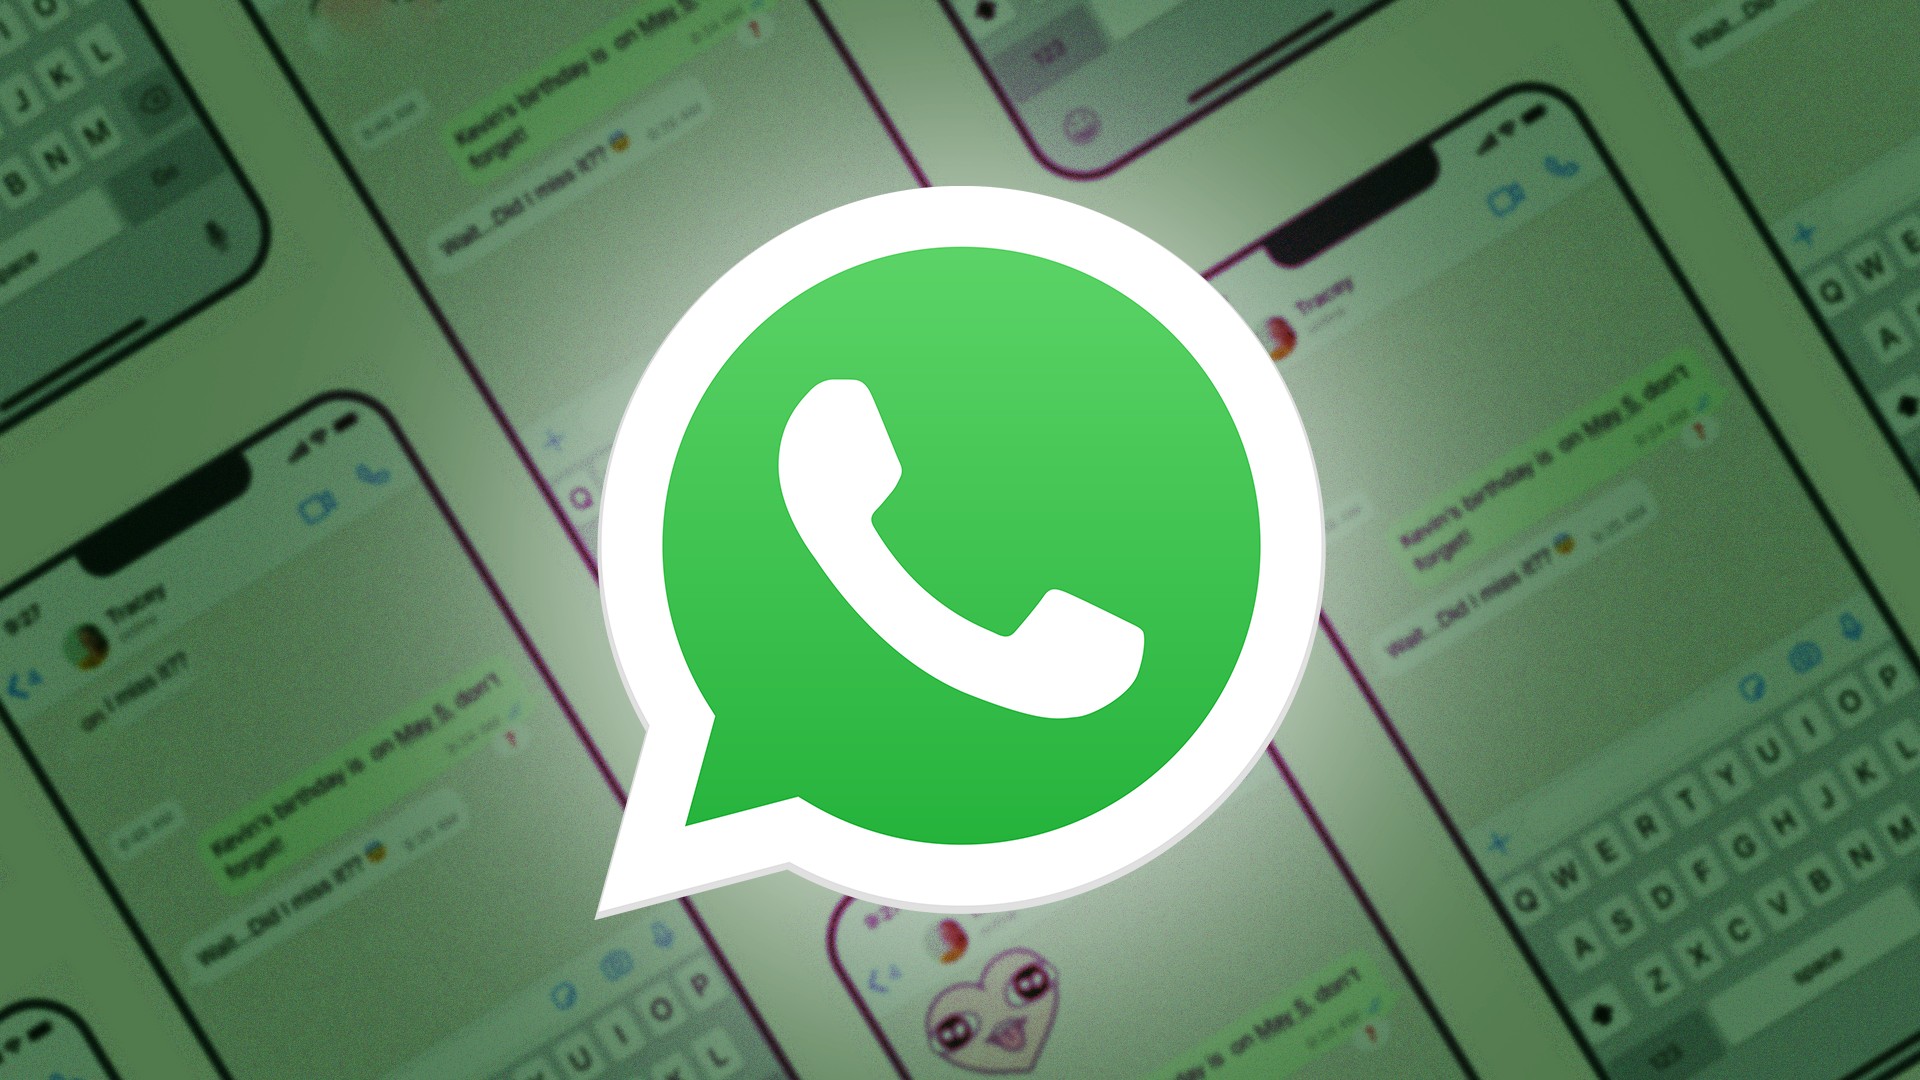 WhatsApp releases support for HD quality photos and videos for all users